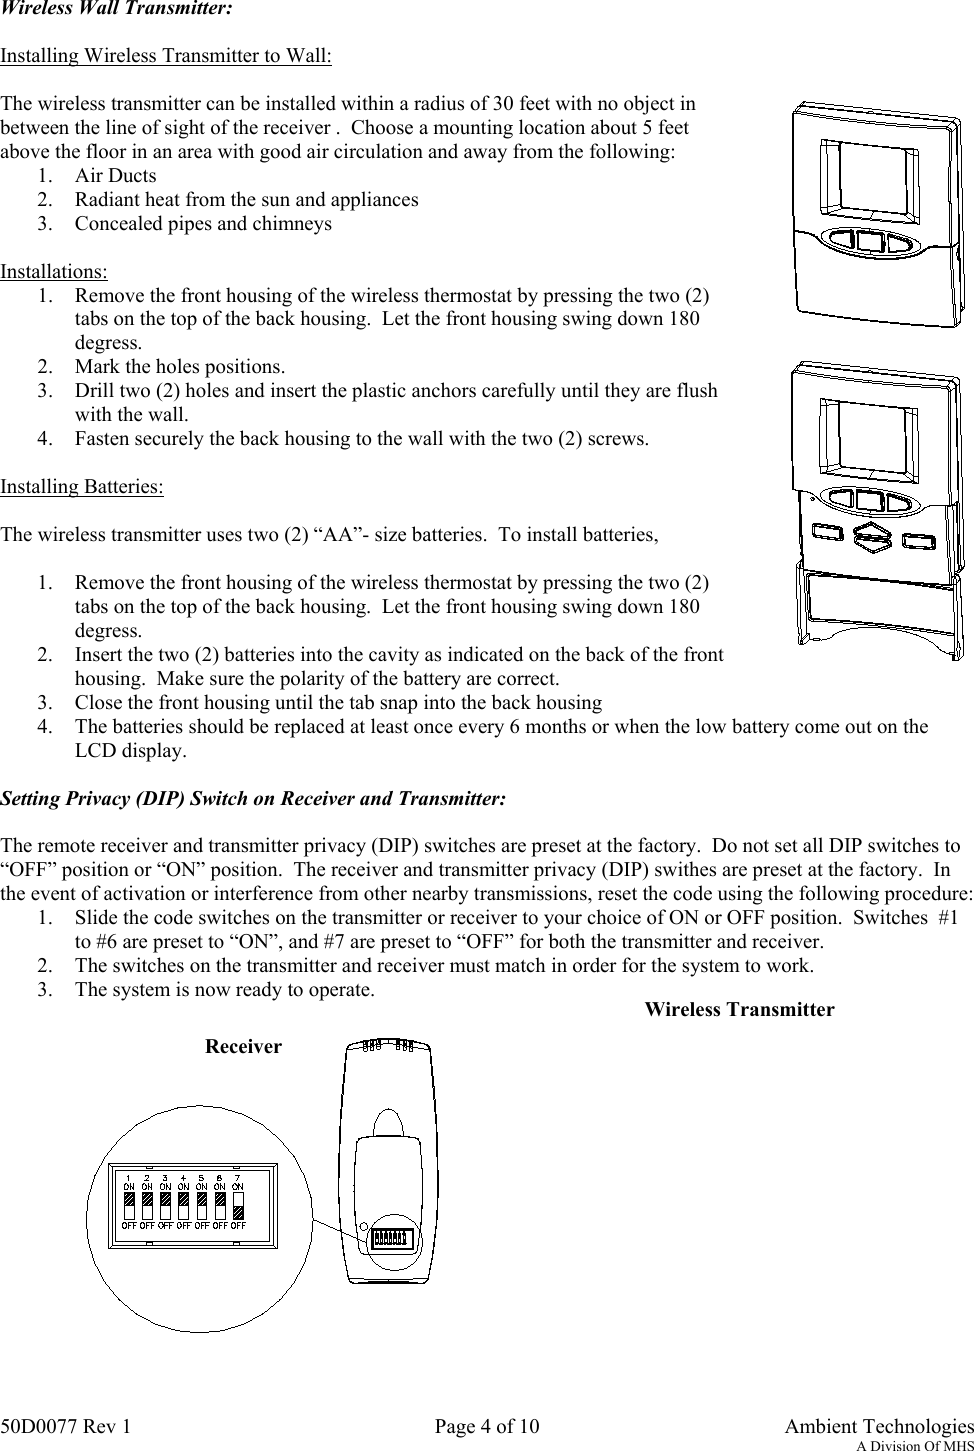 50D0077 Rev 1 Page 4 of 10  Ambient TechnologiesA Division Of MHSWireless Wall Transmitter:Installing Wireless Transmitter to Wall:The wireless transmitter can be installed within a radius of 30 feet with no object inbetween the line of sight of the receiver .  Choose a mounting location about 5 feetabove the floor in an area with good air circulation and away from the following:1. Air Ducts2. Radiant heat from the sun and appliances3. Concealed pipes and chimneysInstallations:1. Remove the front housing of the wireless thermostat by pressing the two (2)tabs on the top of the back housing.  Let the front housing swing down 180degress.2. Mark the holes positions.3. Drill two (2) holes and insert the plastic anchors carefully until they are flushwith the wall.4. Fasten securely the back housing to the wall with the two (2) screws.Installing Batteries:The wireless transmitter uses two (2) “AA”- size batteries.  To install batteries,1. Remove the front housing of the wireless thermostat by pressing the two (2)tabs on the top of the back housing.  Let the front housing swing down 180degress.2. Insert the two (2) batteries into the cavity as indicated on the back of the fronthousing.  Make sure the polarity of the battery are correct.3. Close the front housing until the tab snap into the back housing4. The batteries should be replaced at least once every 6 months or when the low battery come out on theLCD display.Setting Privacy (DIP) Switch on Receiver and Transmitter:The remote receiver and transmitter privacy (DIP) switches are preset at the factory.  Do not set all DIP switches to“OFF” position or “ON” position.  The receiver and transmitter privacy (DIP) swithes are preset at the factory.  Inthe event of activation or interference from other nearby transmissions, reset the code using the following procedure:1. Slide the code switches on the transmitter or receiver to your choice of ON or OFF position.  Switches  #1to #6 are preset to “ON”, and #7 are preset to “OFF” for both the transmitter and receiver.2. The switches on the transmitter and receiver must match in order for the system to work.3. The system is now ready to operate.ReceiverWireless Transmitter